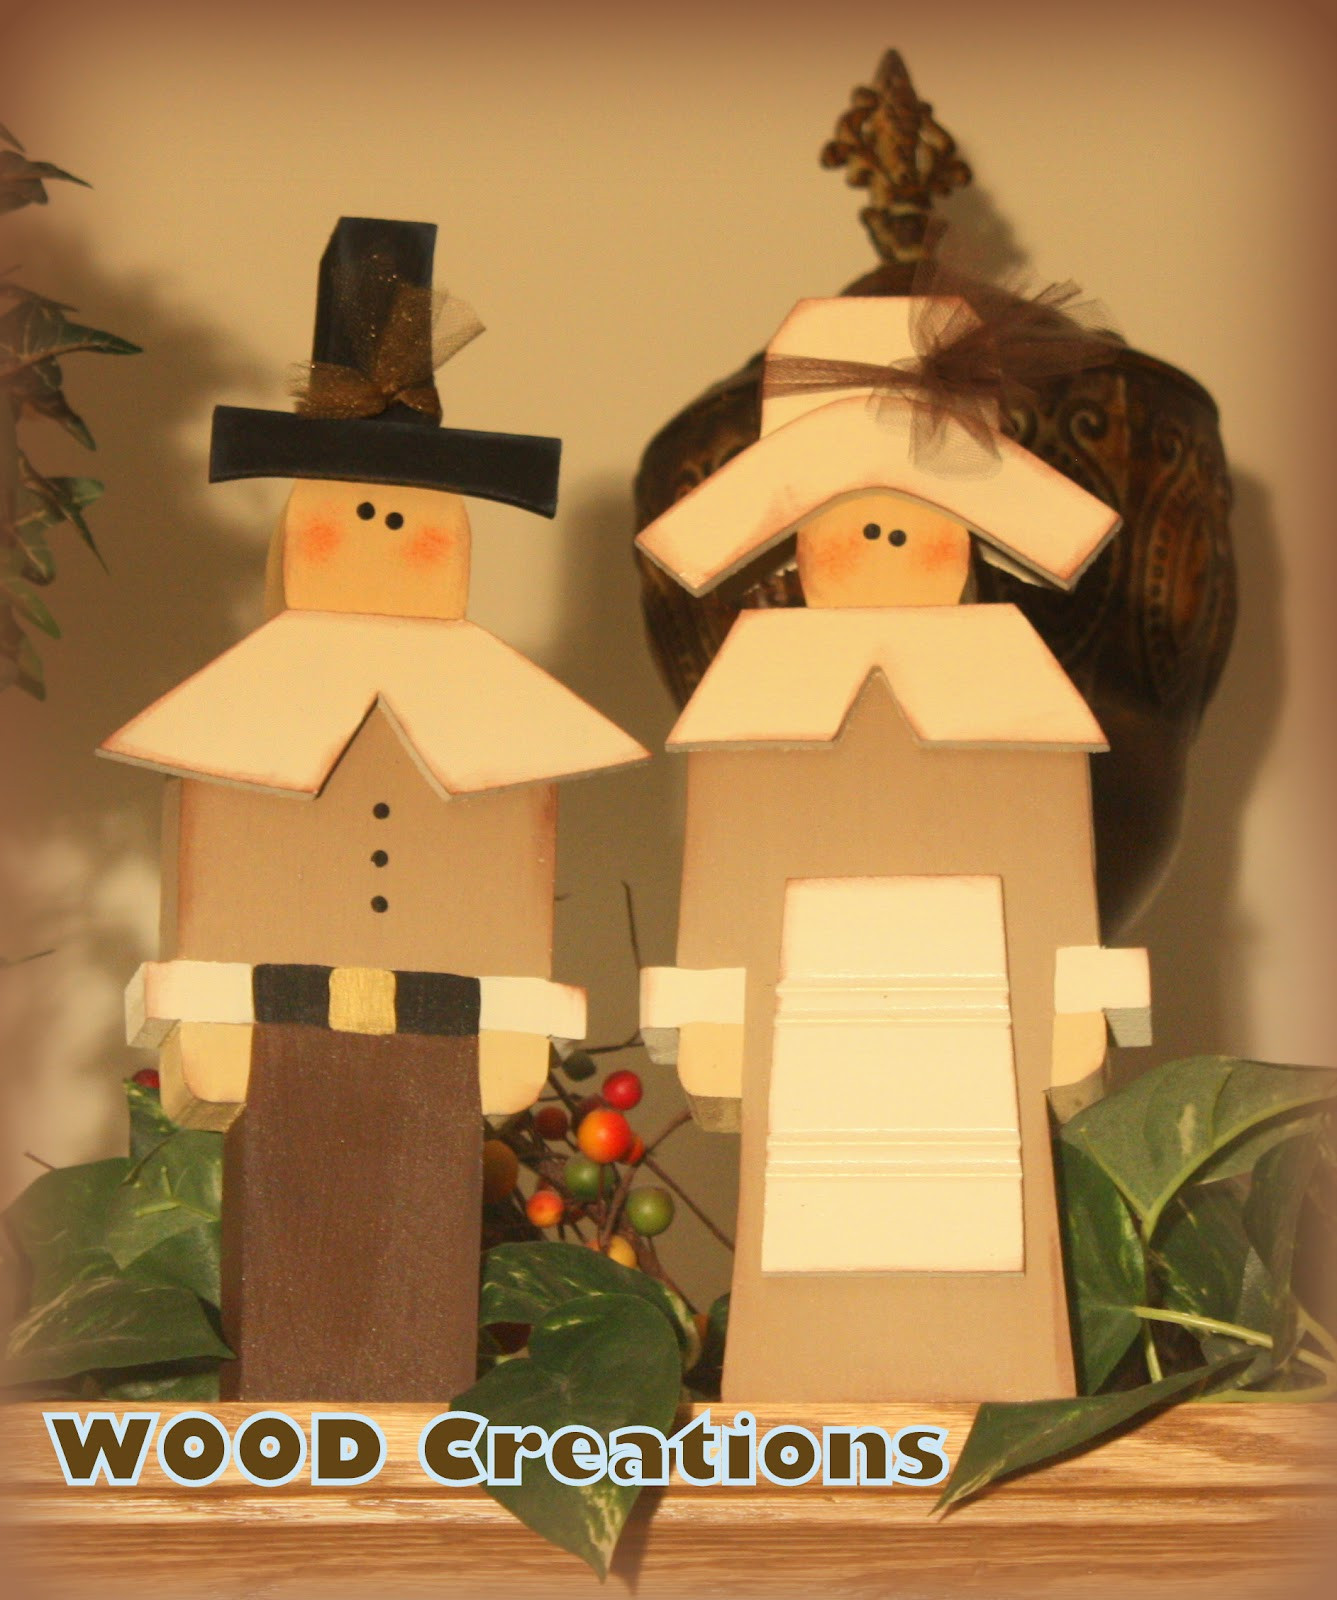 Thanksgiving Wood Crafts
 WOOD Creations Thanksgiving Crafts Are Here